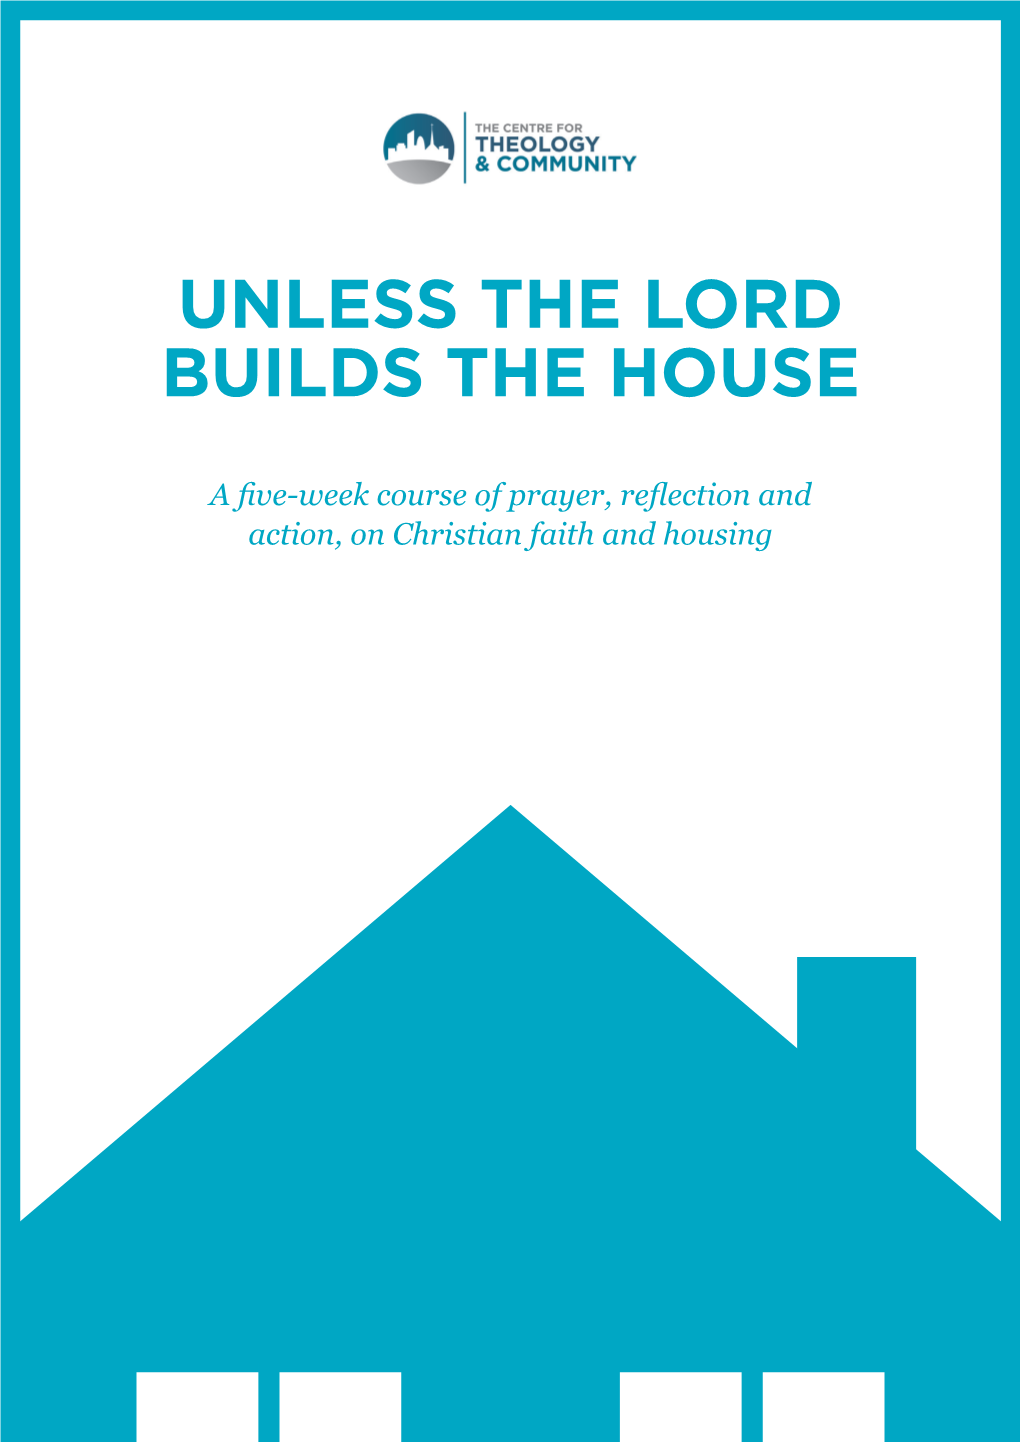 Unless the Lord Builds the House